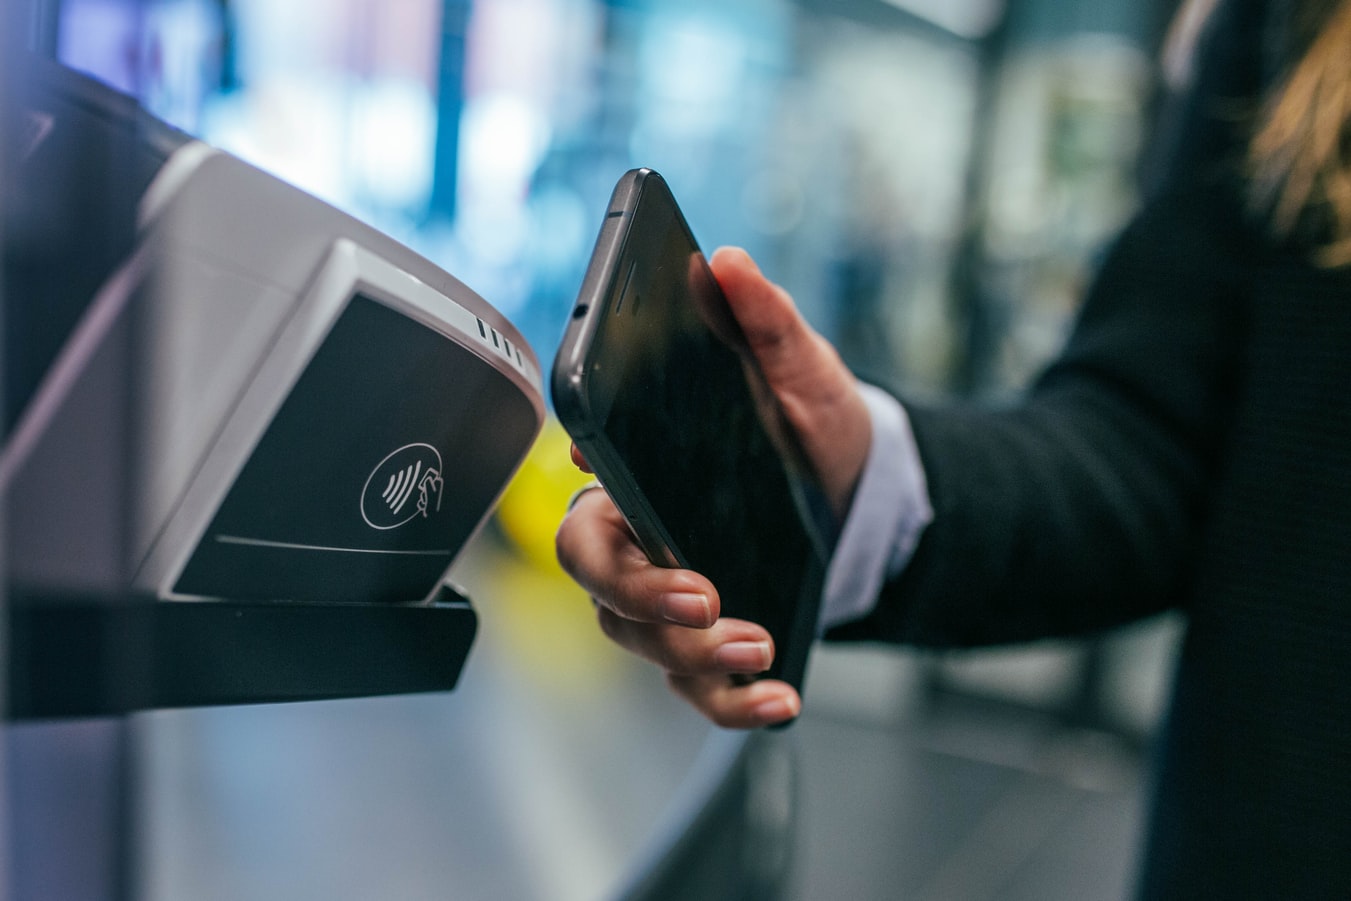 A photo of someone using a mobile-based payment system, highlighting the ease and inclusiveness of fintech solutions.